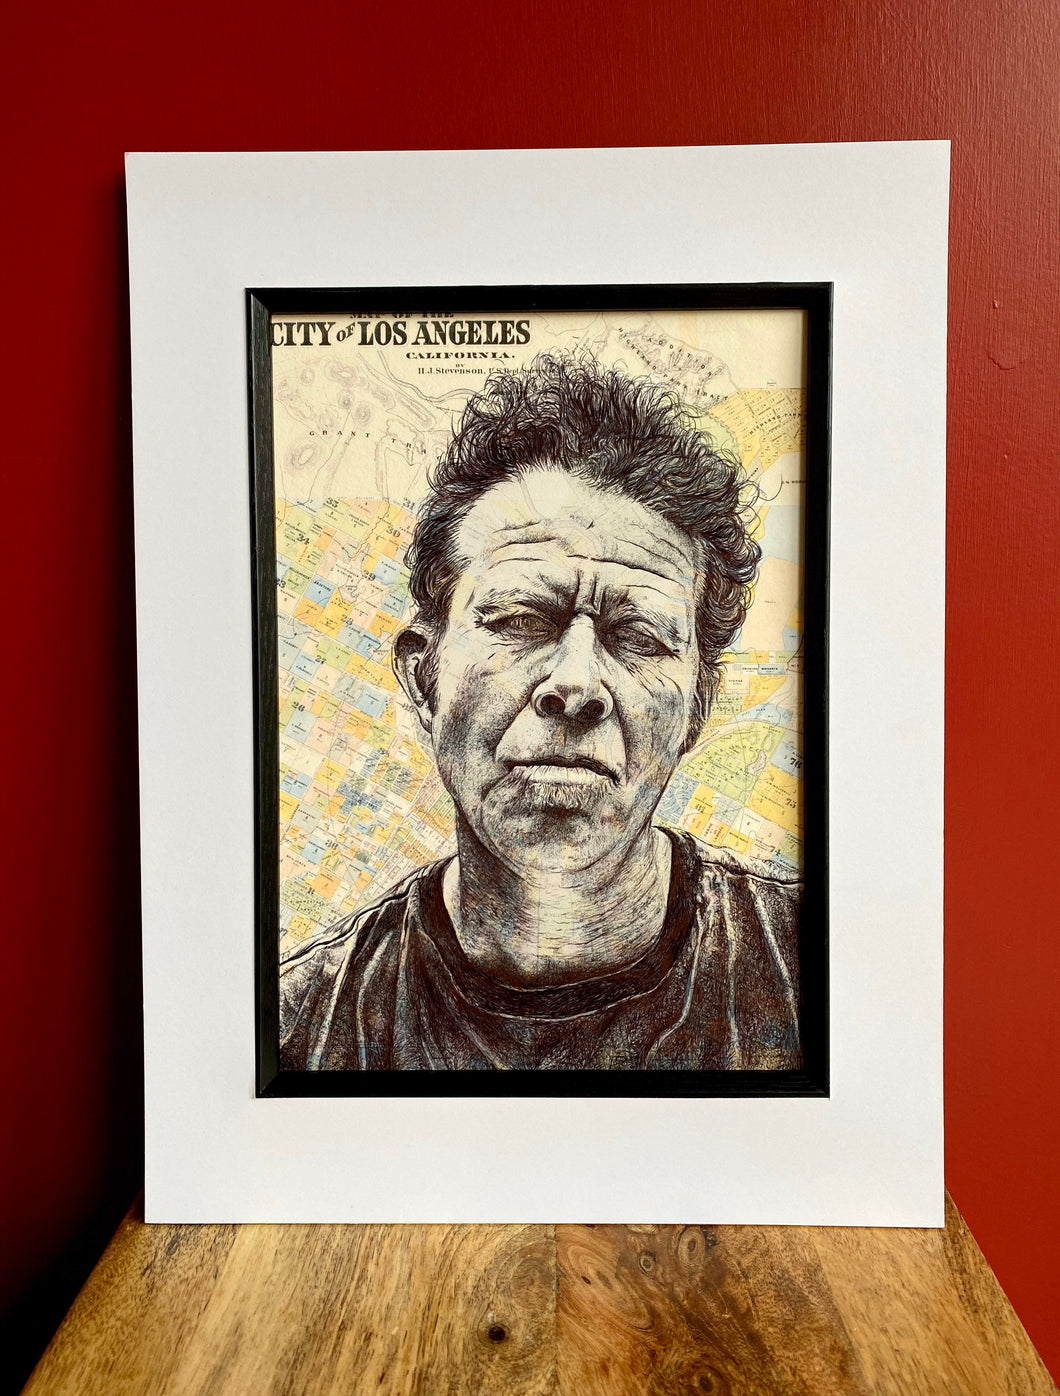 Tom Waits Art Print. Pen drawing over a map of Los Angeles. A4 Unframed